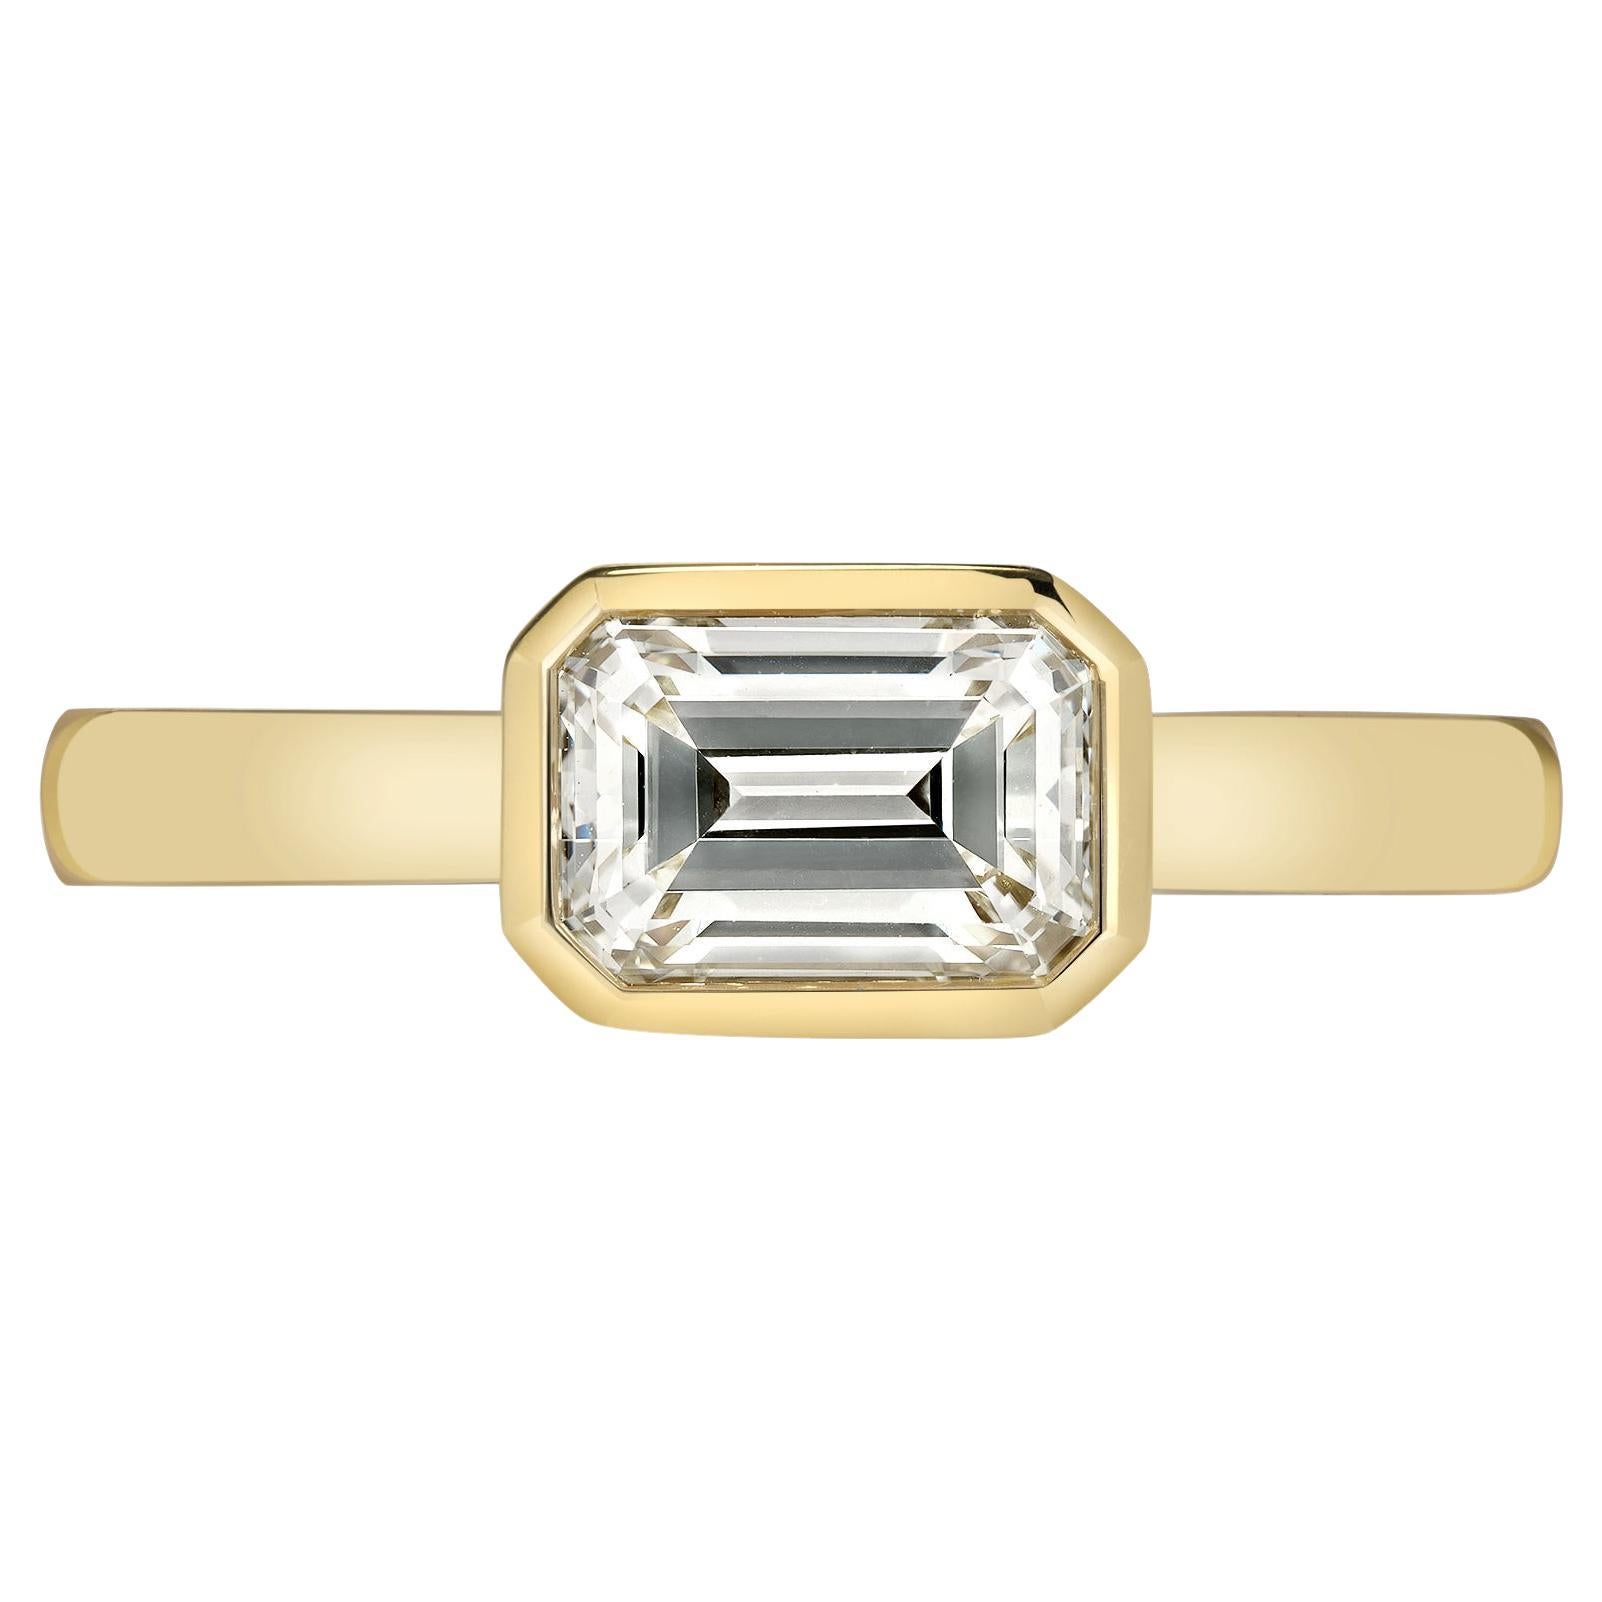 Handcrafted Leah Emerald Cut Diamond Ring by Single Stone